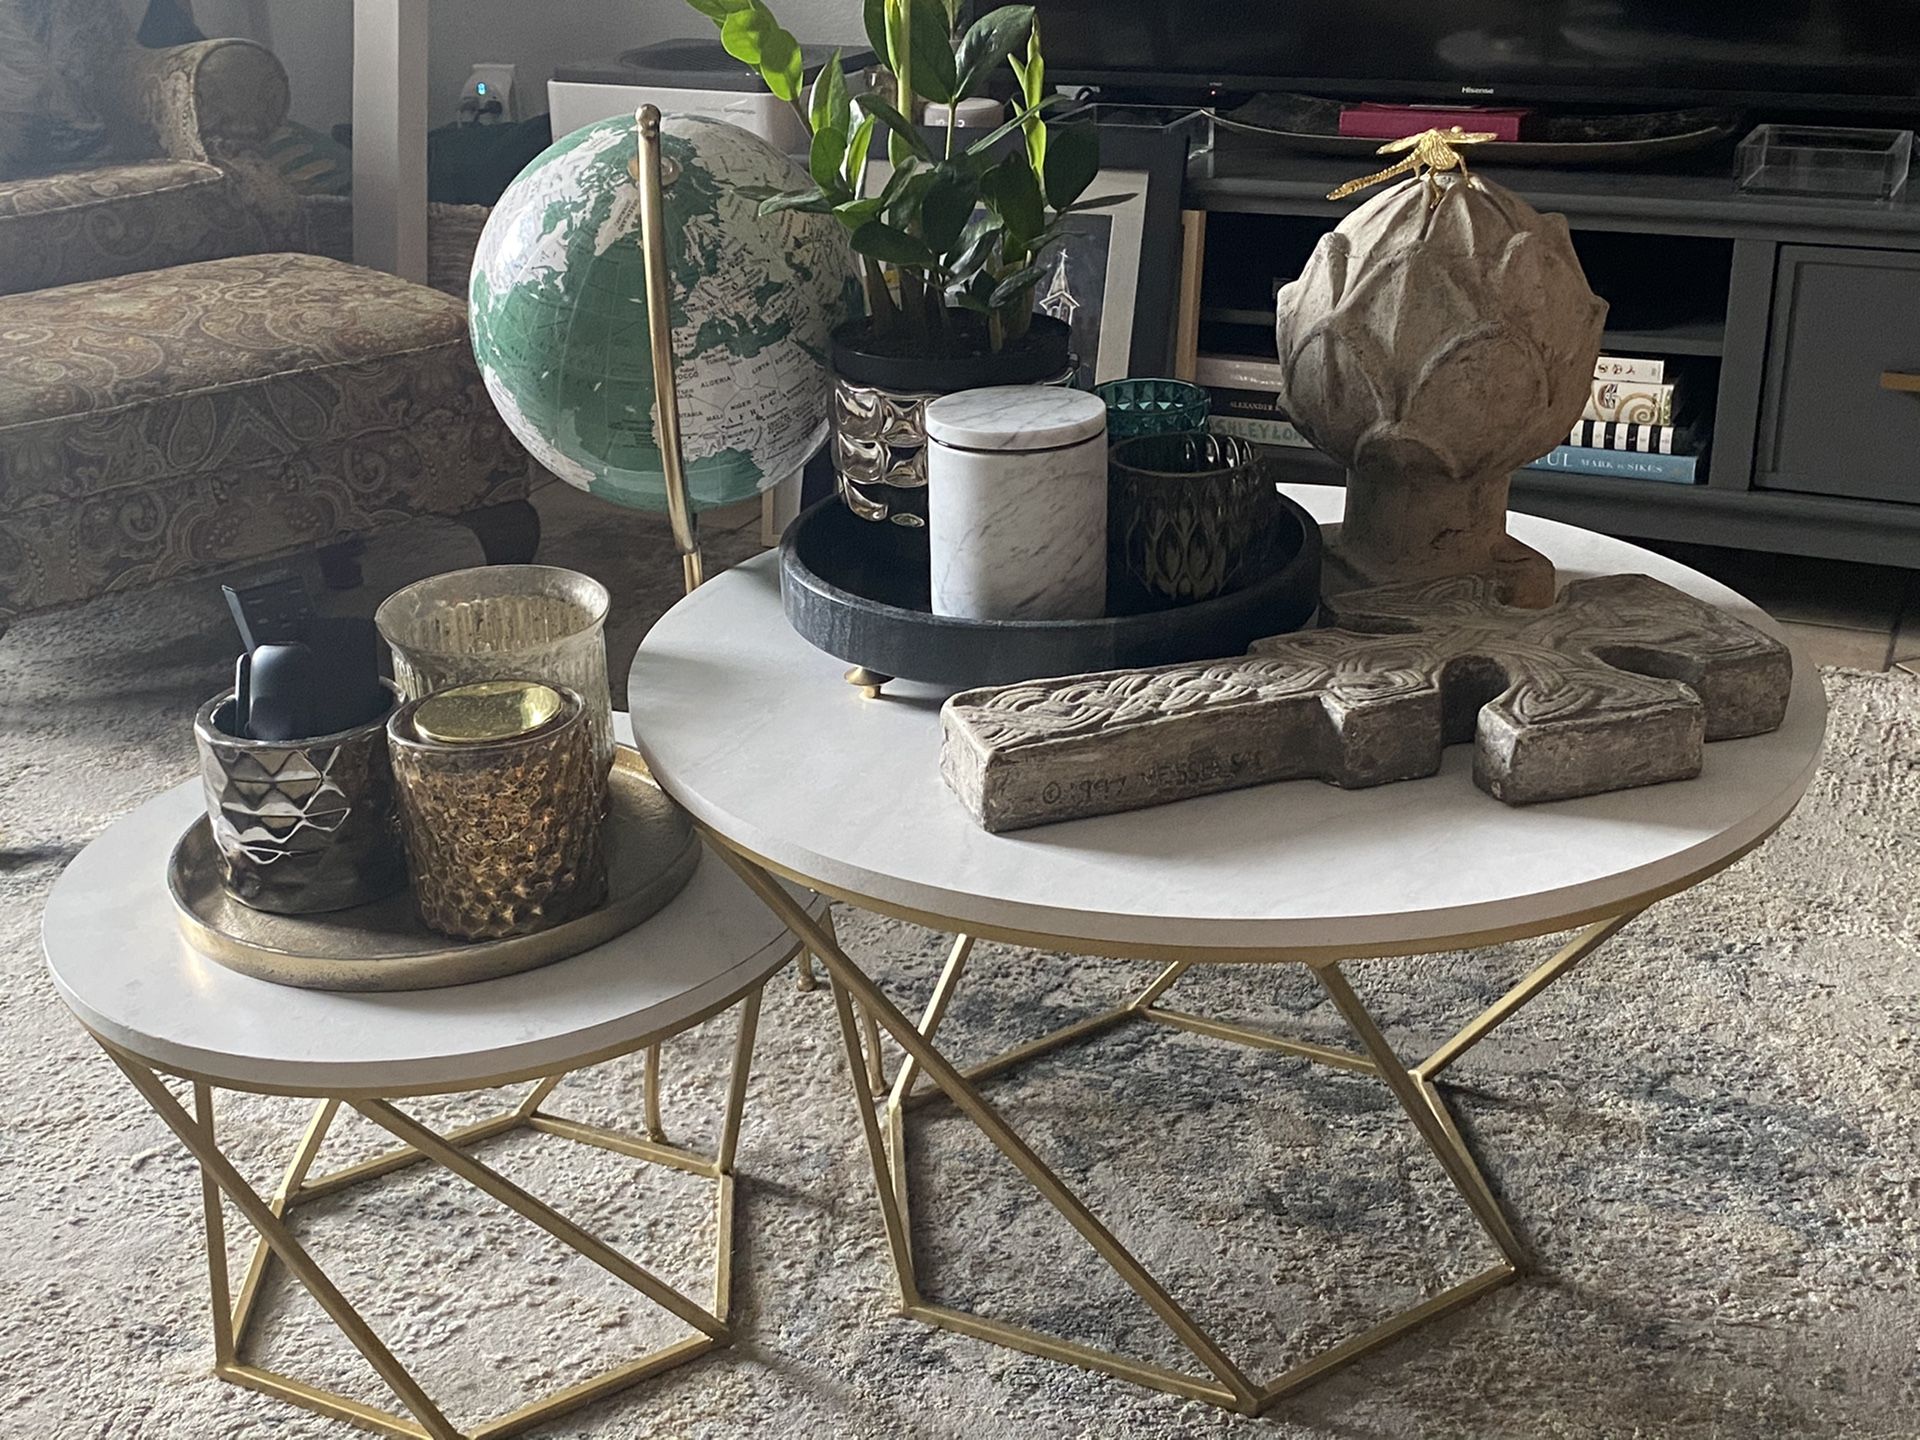 SELLING JUST THE NESTING TABLES -Saracina Home coffee tables